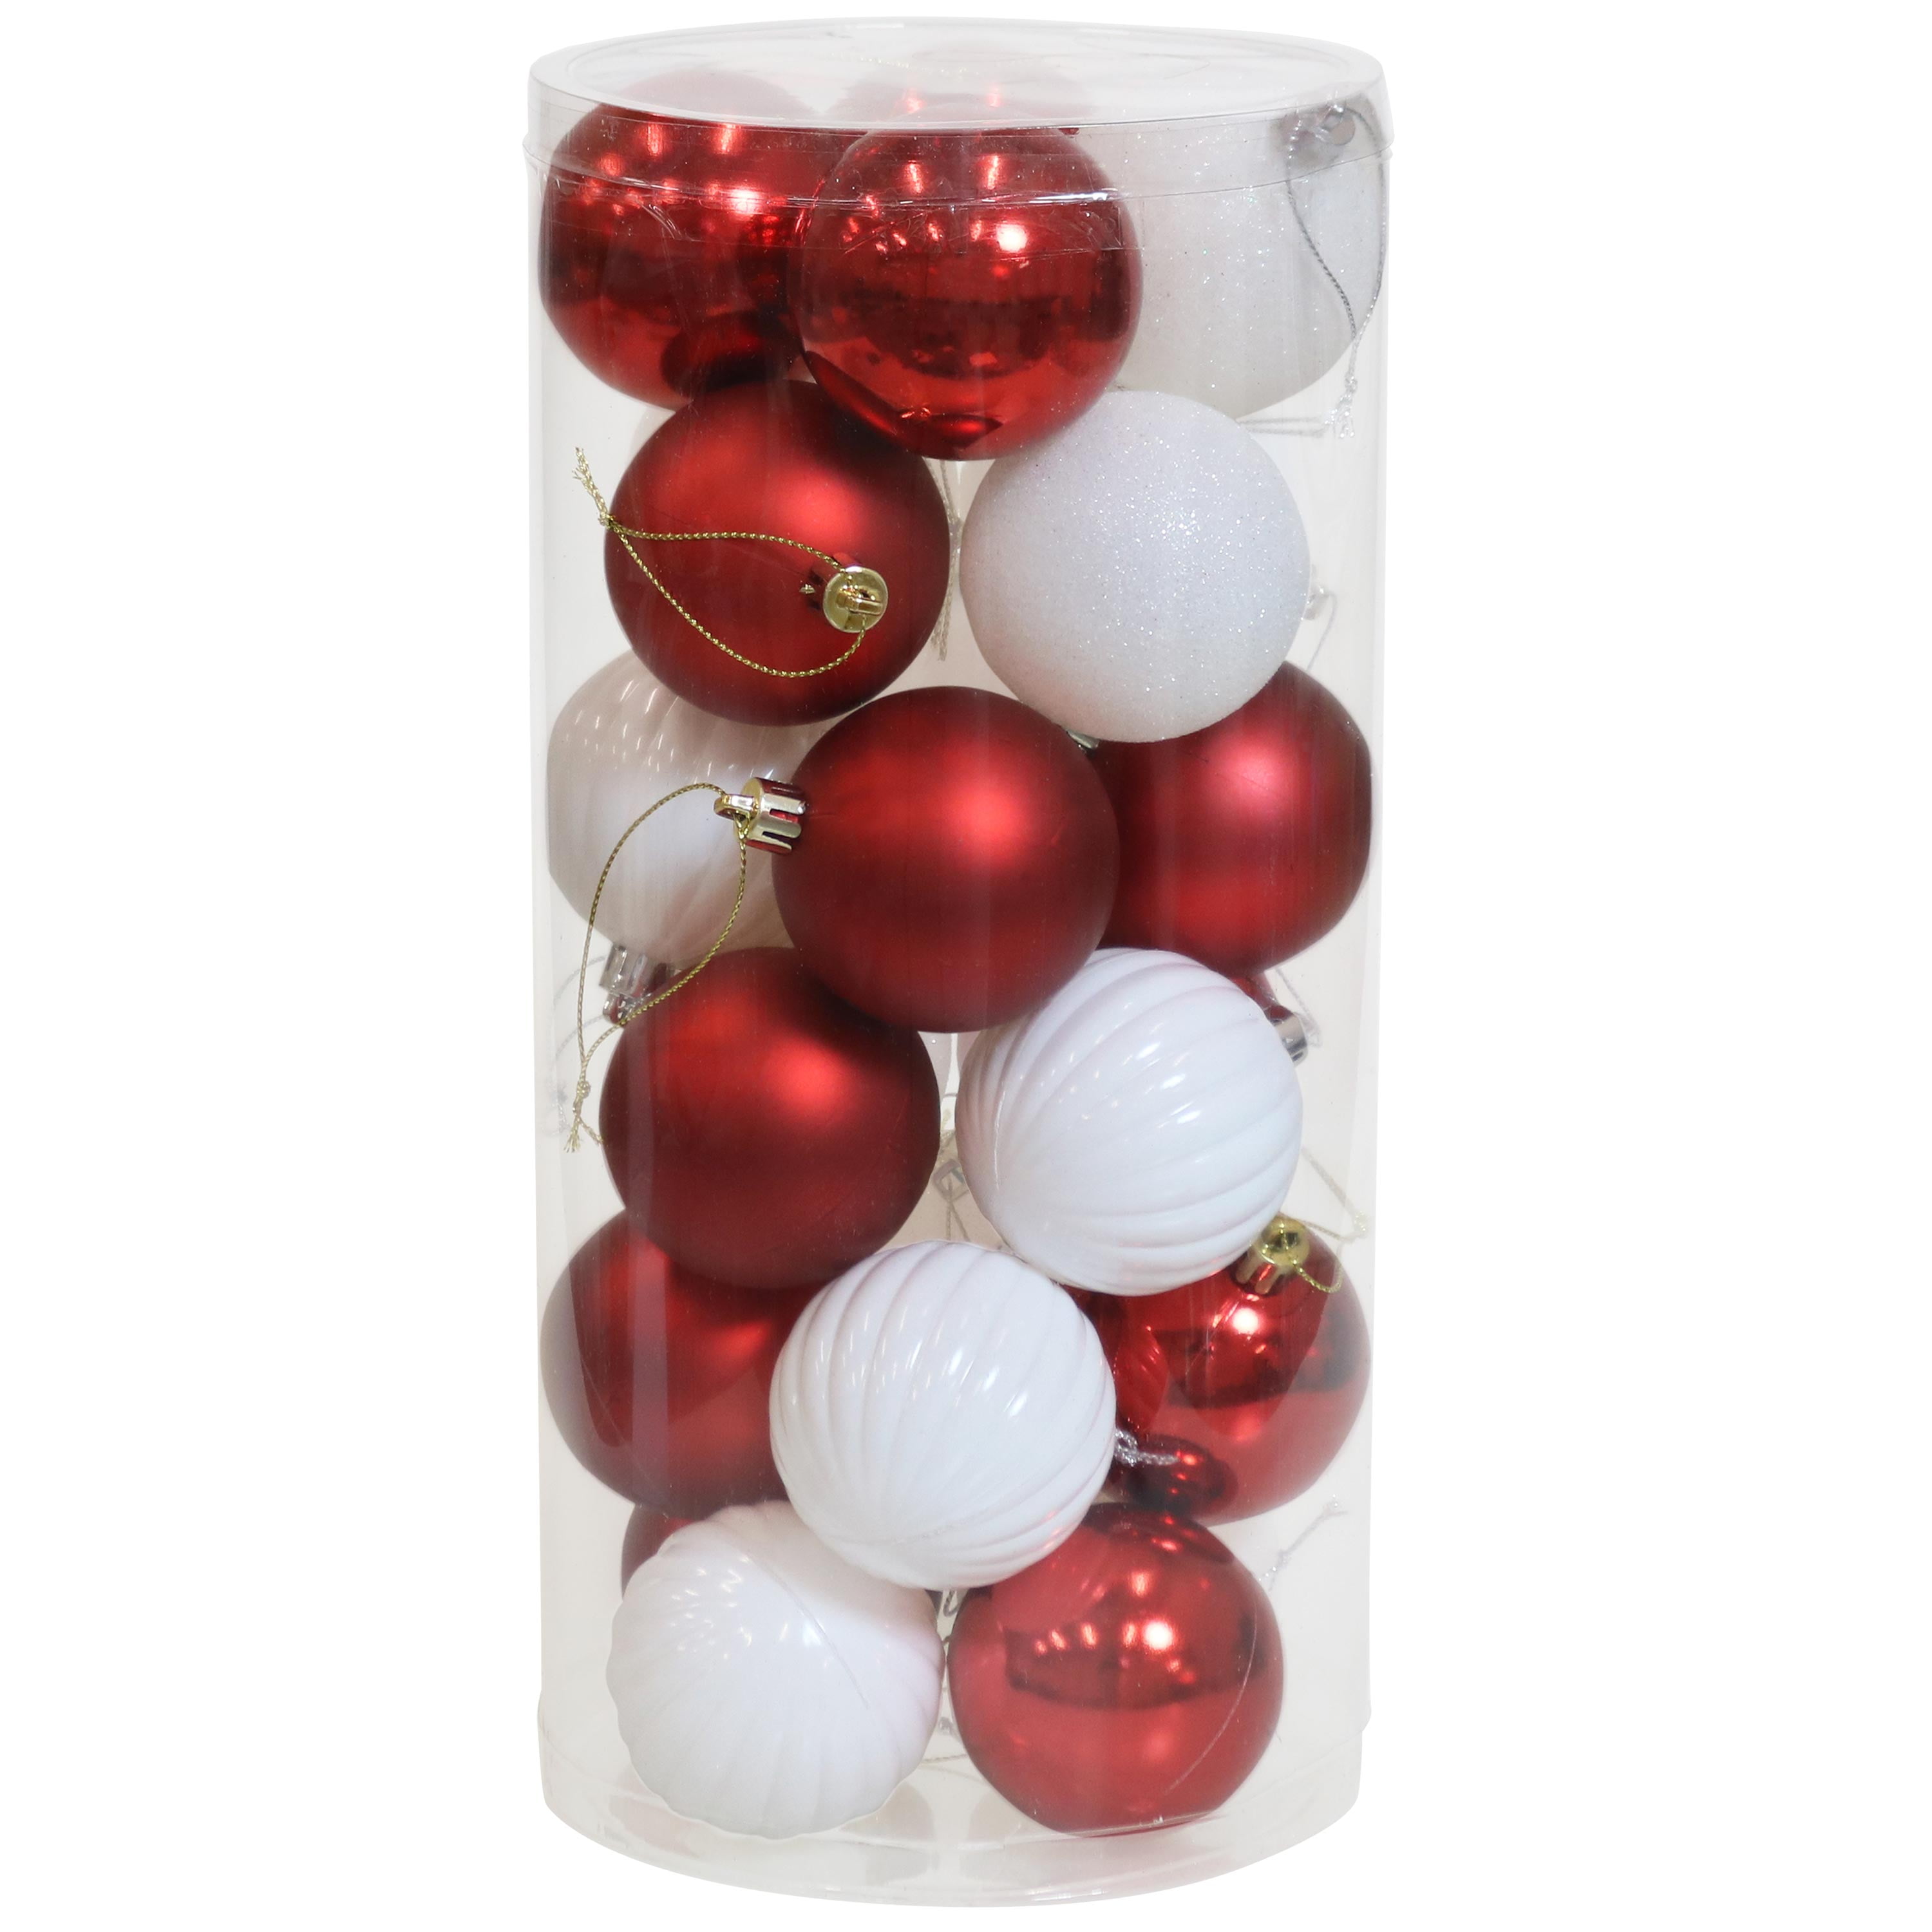 2.36-Inch Sunnydaze 24-Count 60mm Merry Medley Tree Decorations Set for Holiday Decor and Gatherings Shatterproof Christmas Ball Ornaments with Hooks Included Red/Gold